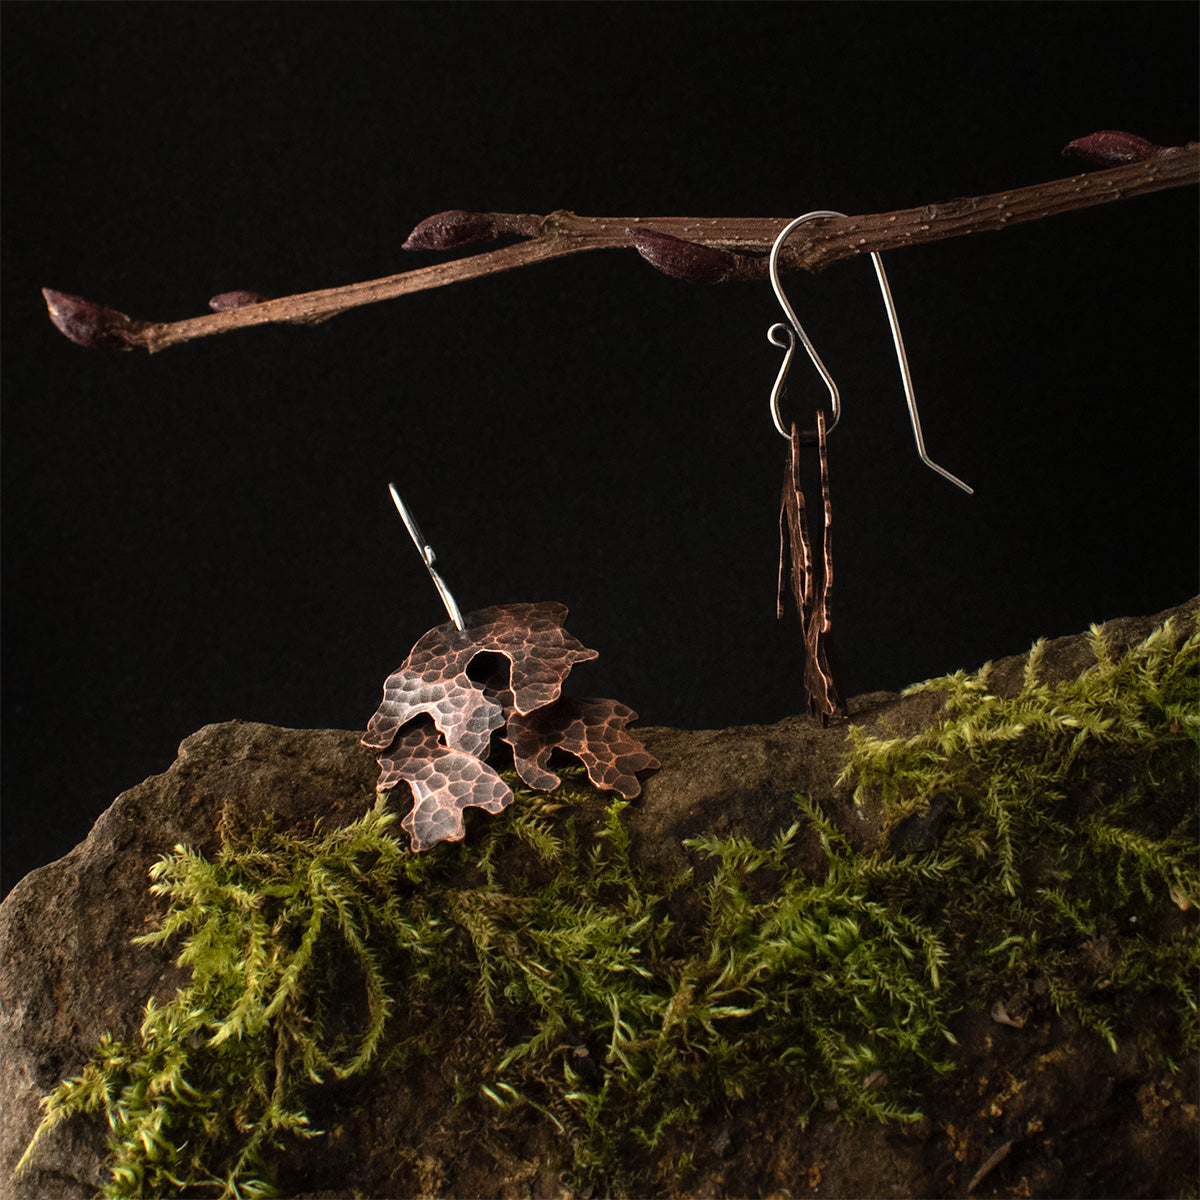 One of the Copper Layered Lichen Earrings is lying down, showing its richly patinated hammer marks, while the other earring dangles by its sterling silver ear wire, showing its two freely hanging layers of copper lichen.